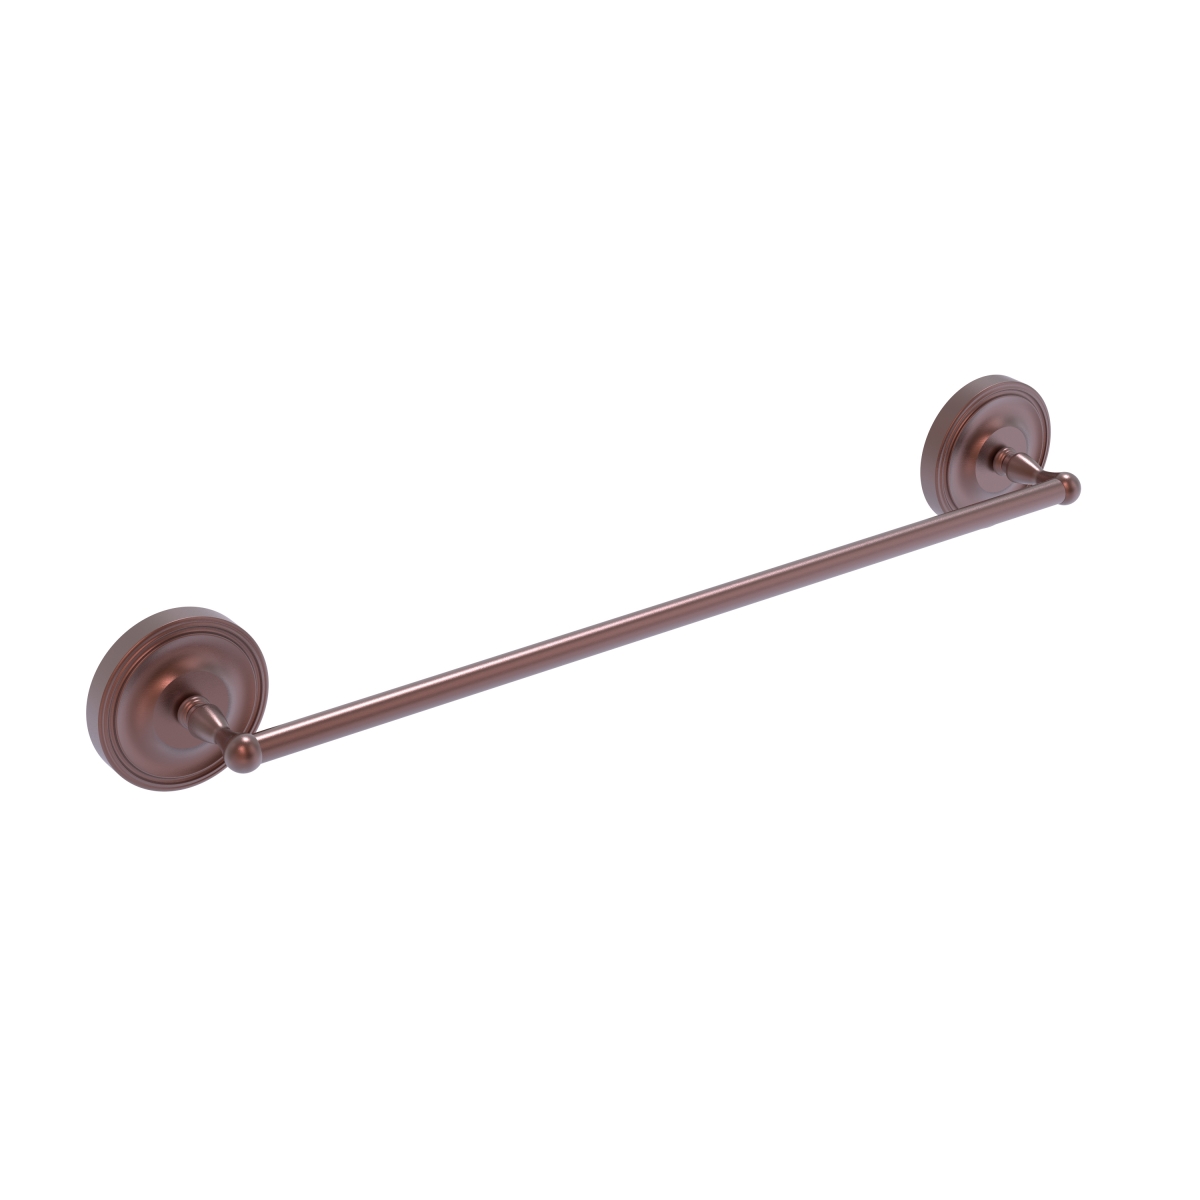 Allied Brass R-31-24-CA 24 in. Regal Collection Towel Bar, Antique Copper - 3 x 27 x 24 in.